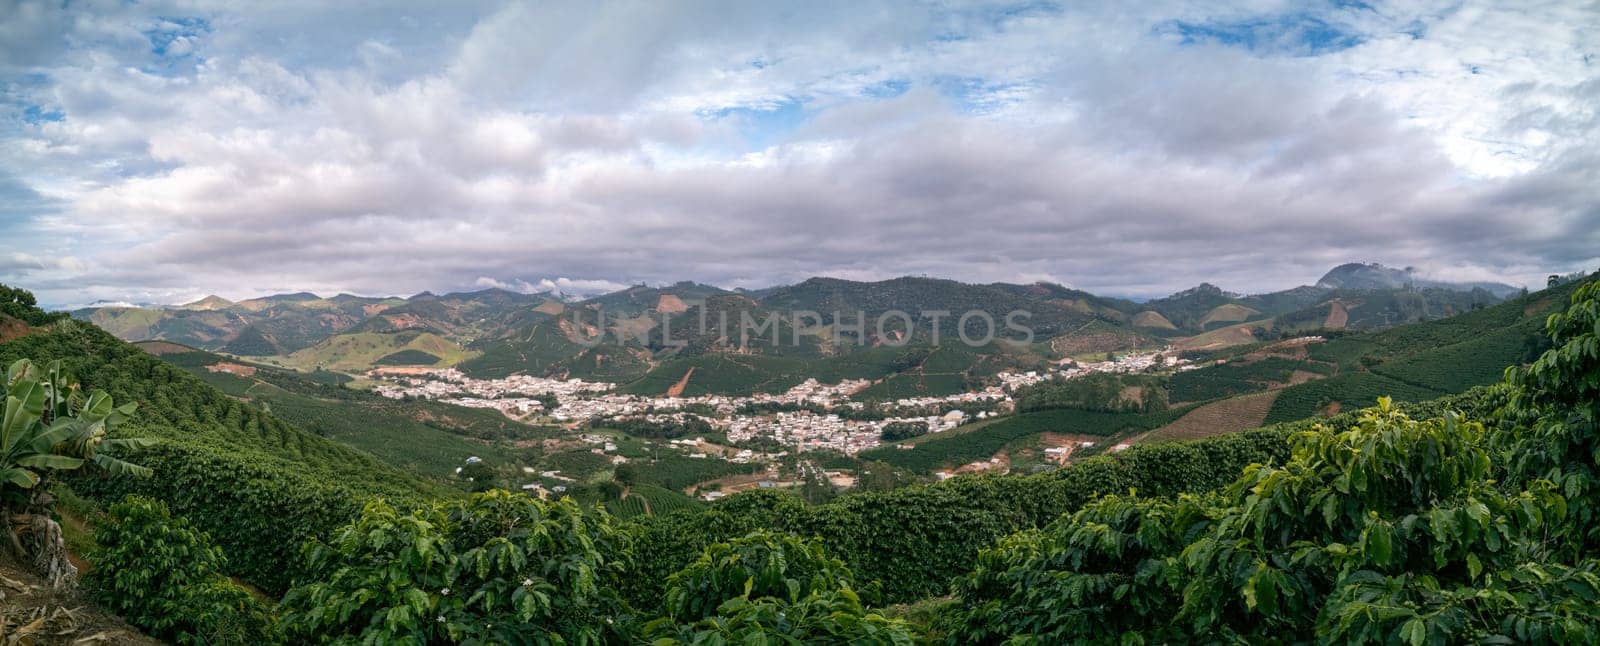 Panoramic view of Alto Caparao coffee town by FerradalFCG